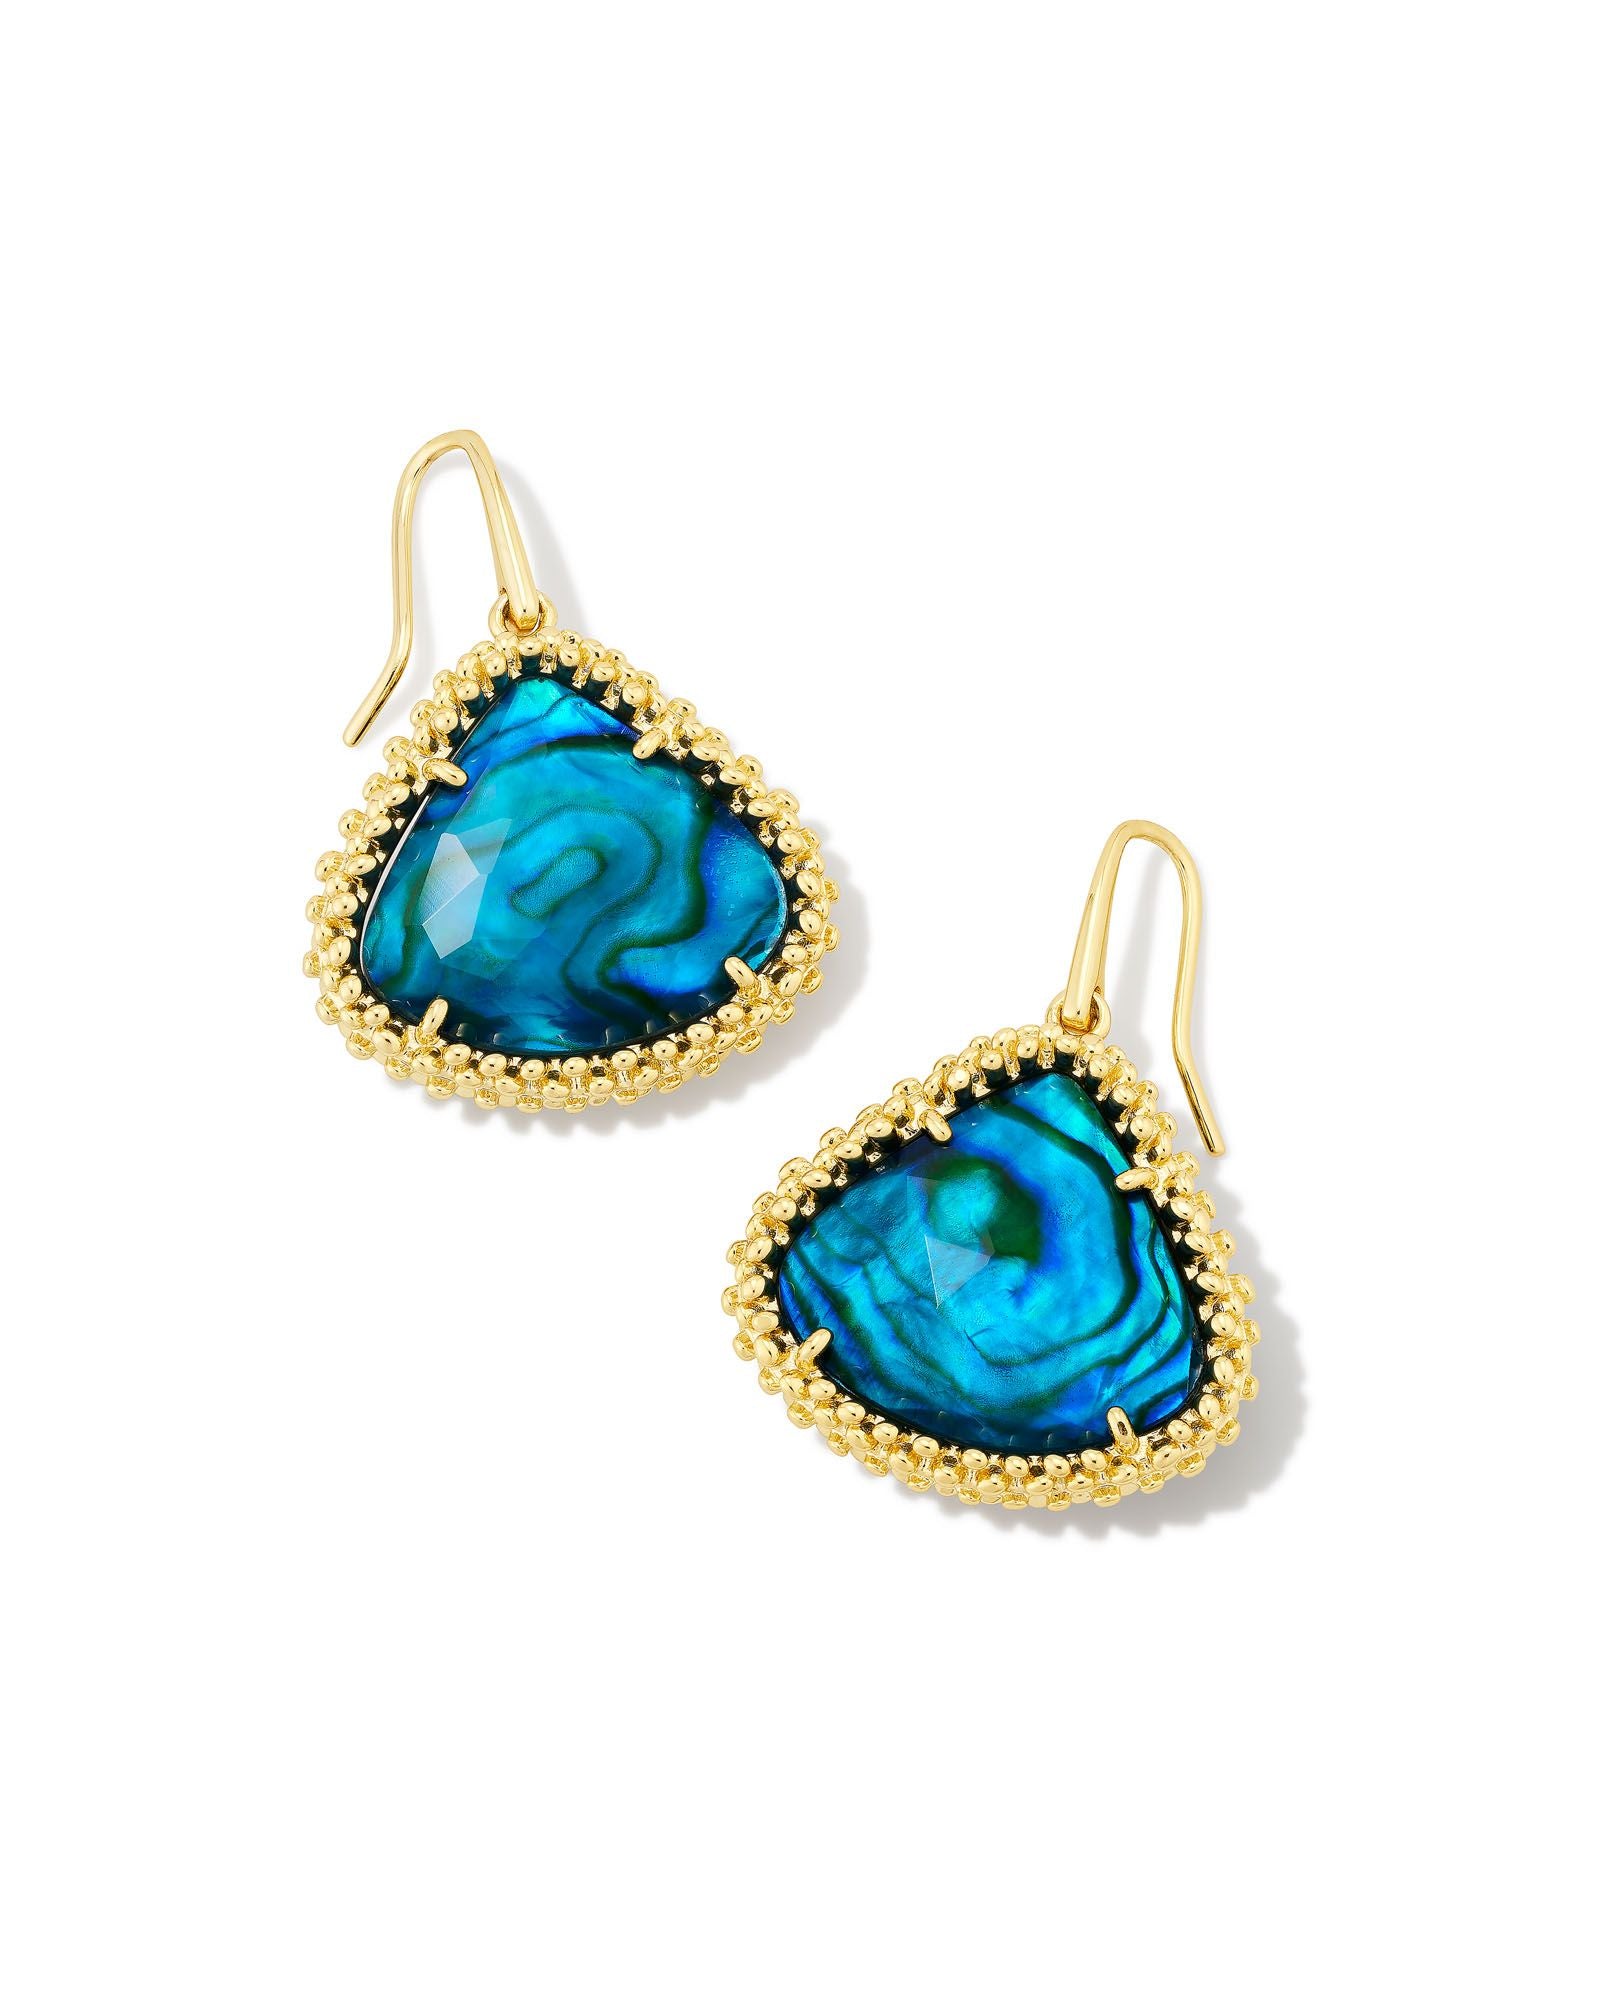 Framed Kendall Large Drop Earring in Gold Teal Abalone